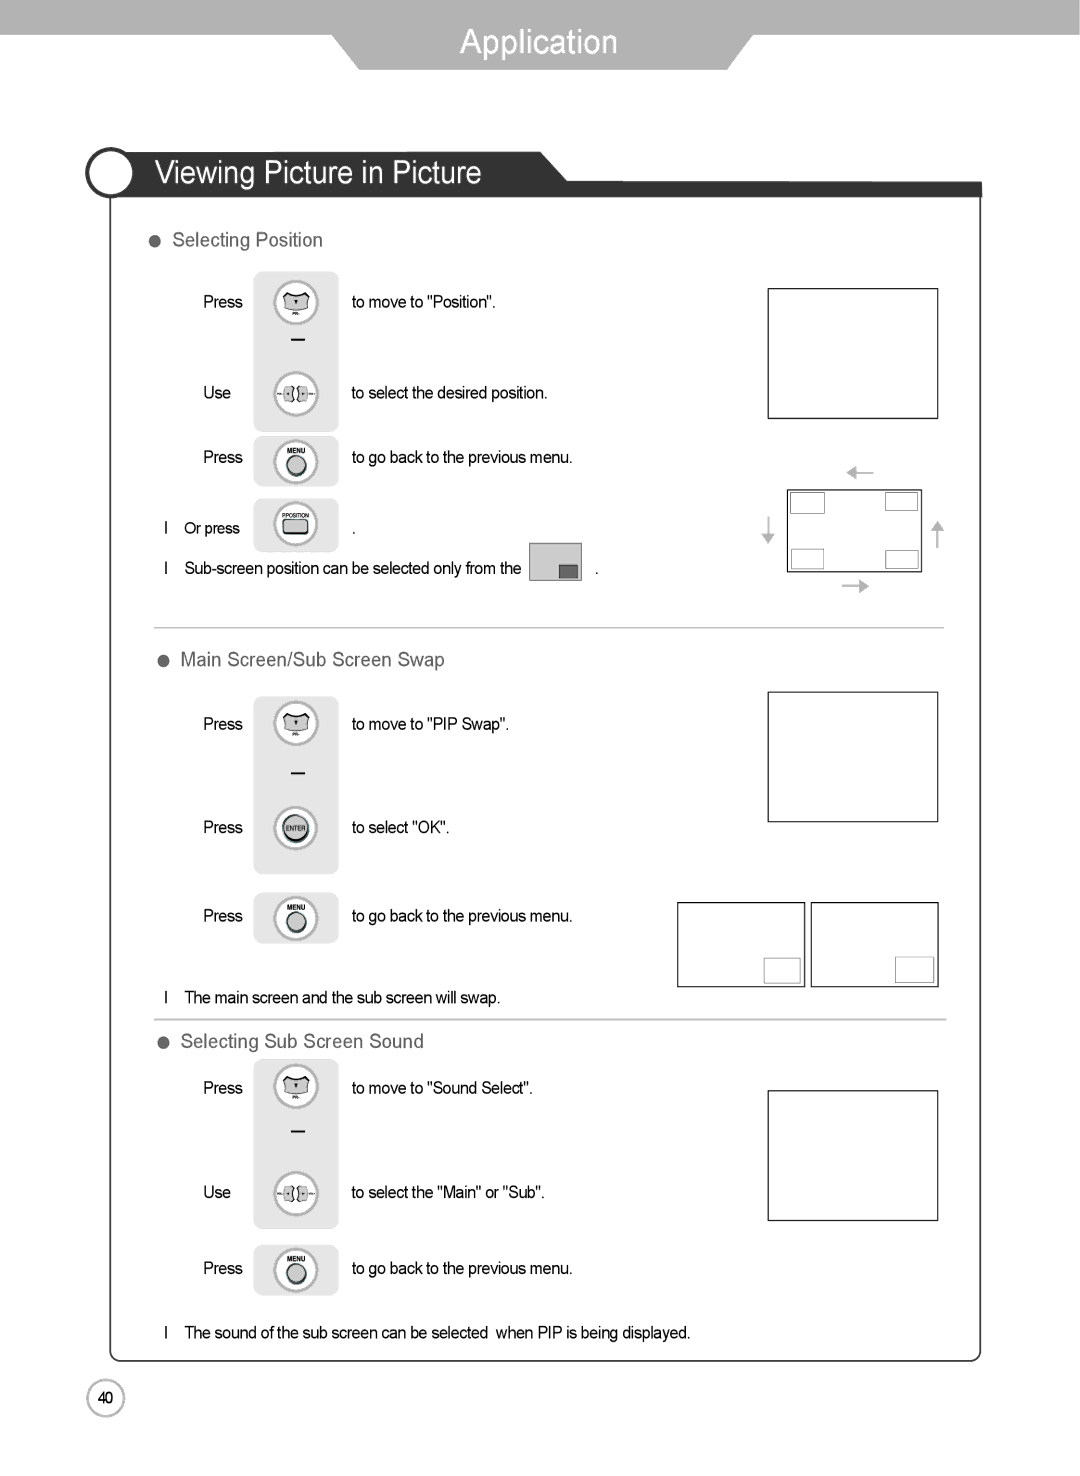 Grundig LXW 102-8625 REF manual Selecting Position, Main Screen/Sub Screen Swap, Selecting Sub Screen Sound 